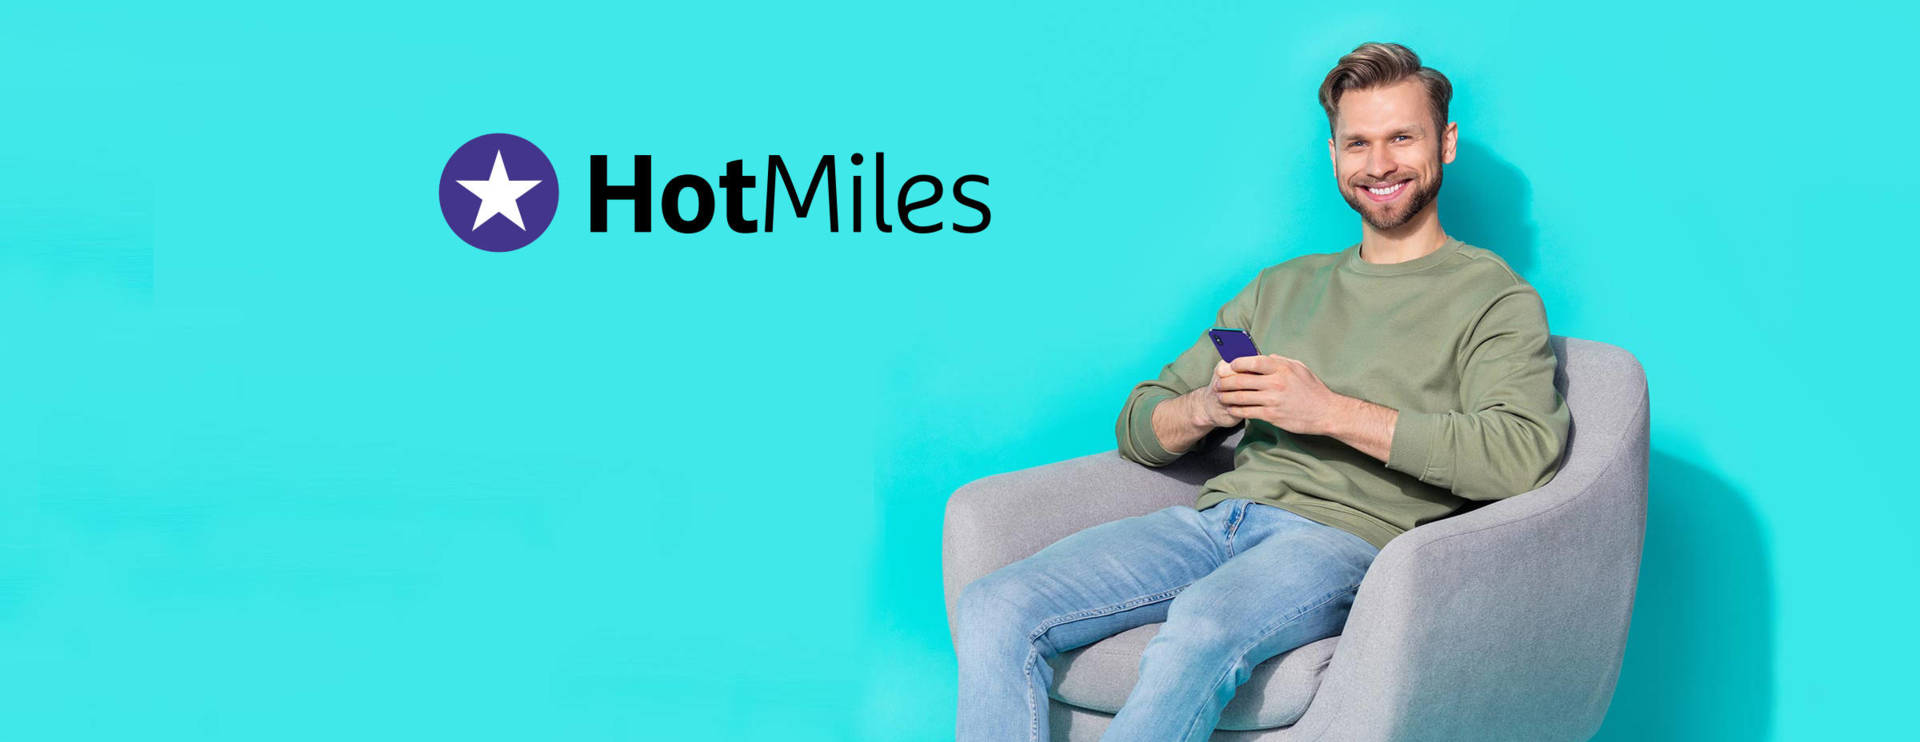 Download our app now and secure yourself many Extra HotMiles